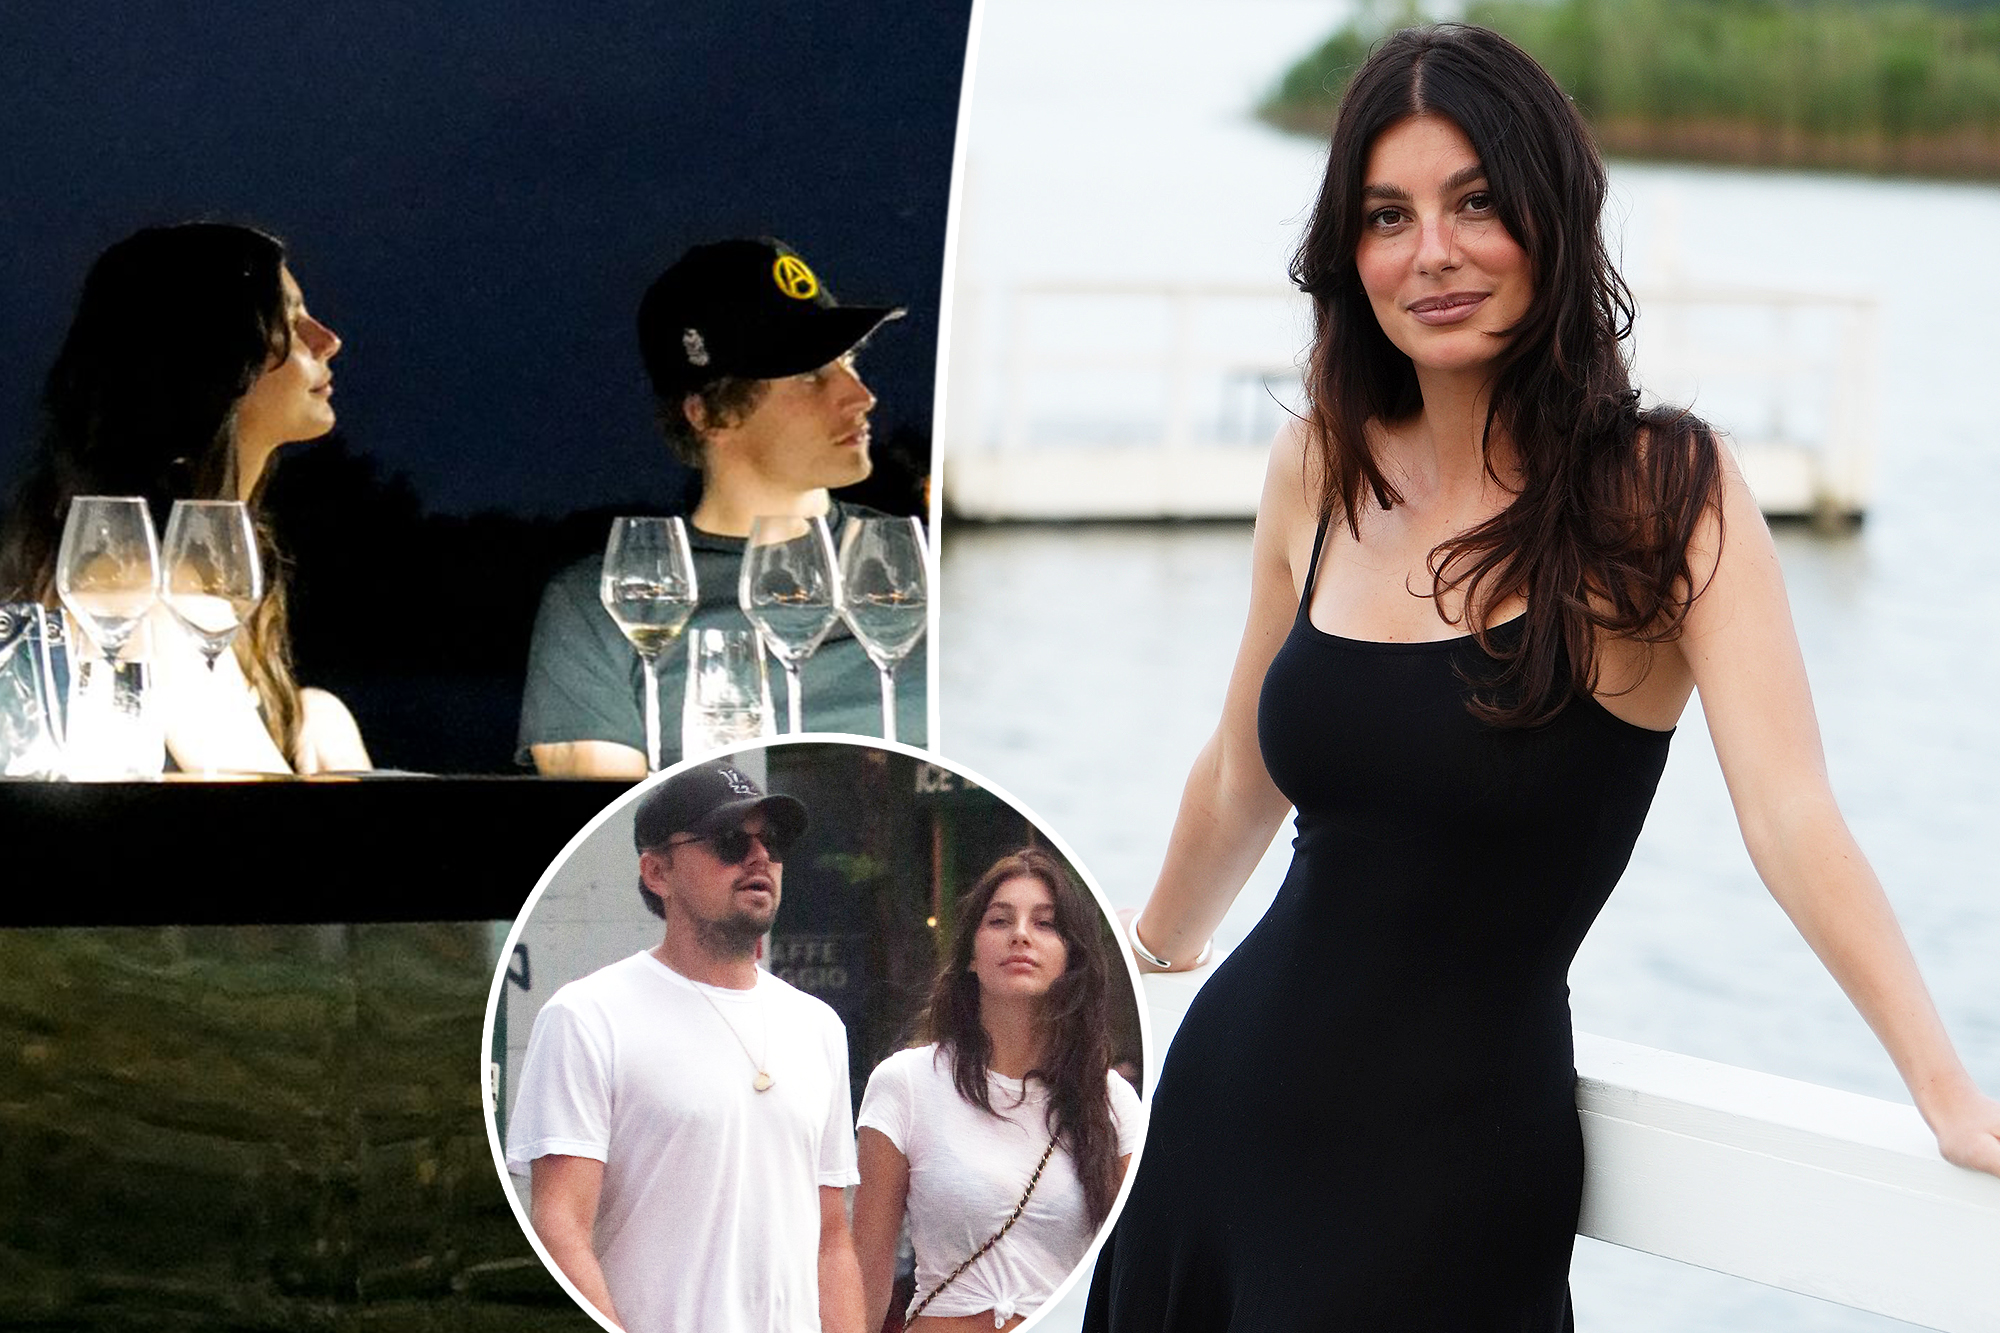 Camila Morrone Spotted in the Hamptons with New Beau - Exclusive Details!